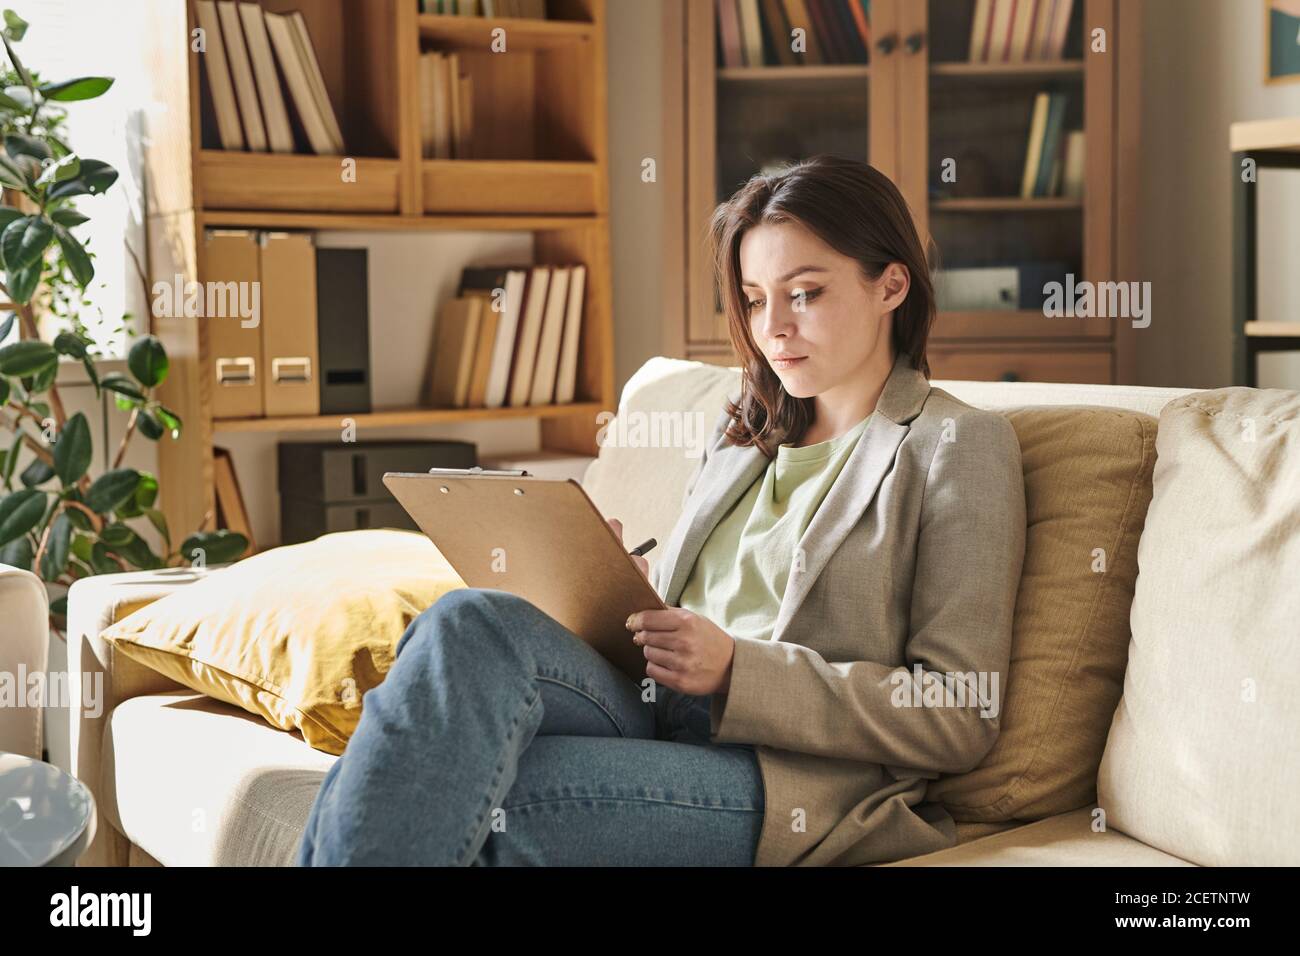 Attractive young woman sitting on sofa in modern office room holding clipboard making notes Stock Photo